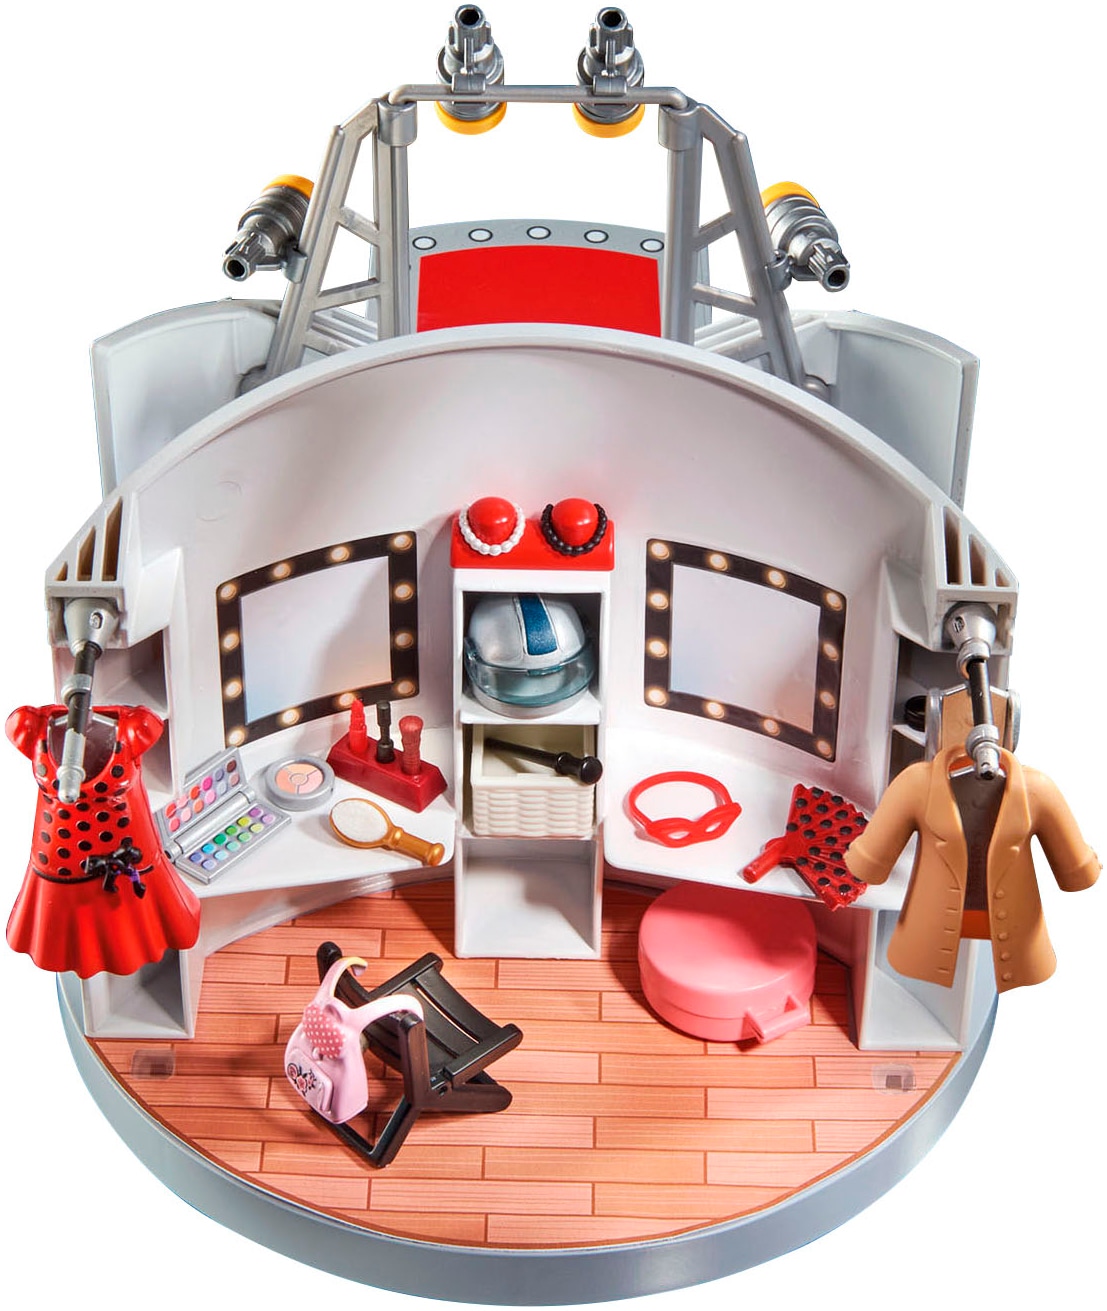 Playmobil® Konstruktions-Spielset »Miraculous: Gabriels Fashion Show (71335), Miraculous«, (66 St.), Made in Europe